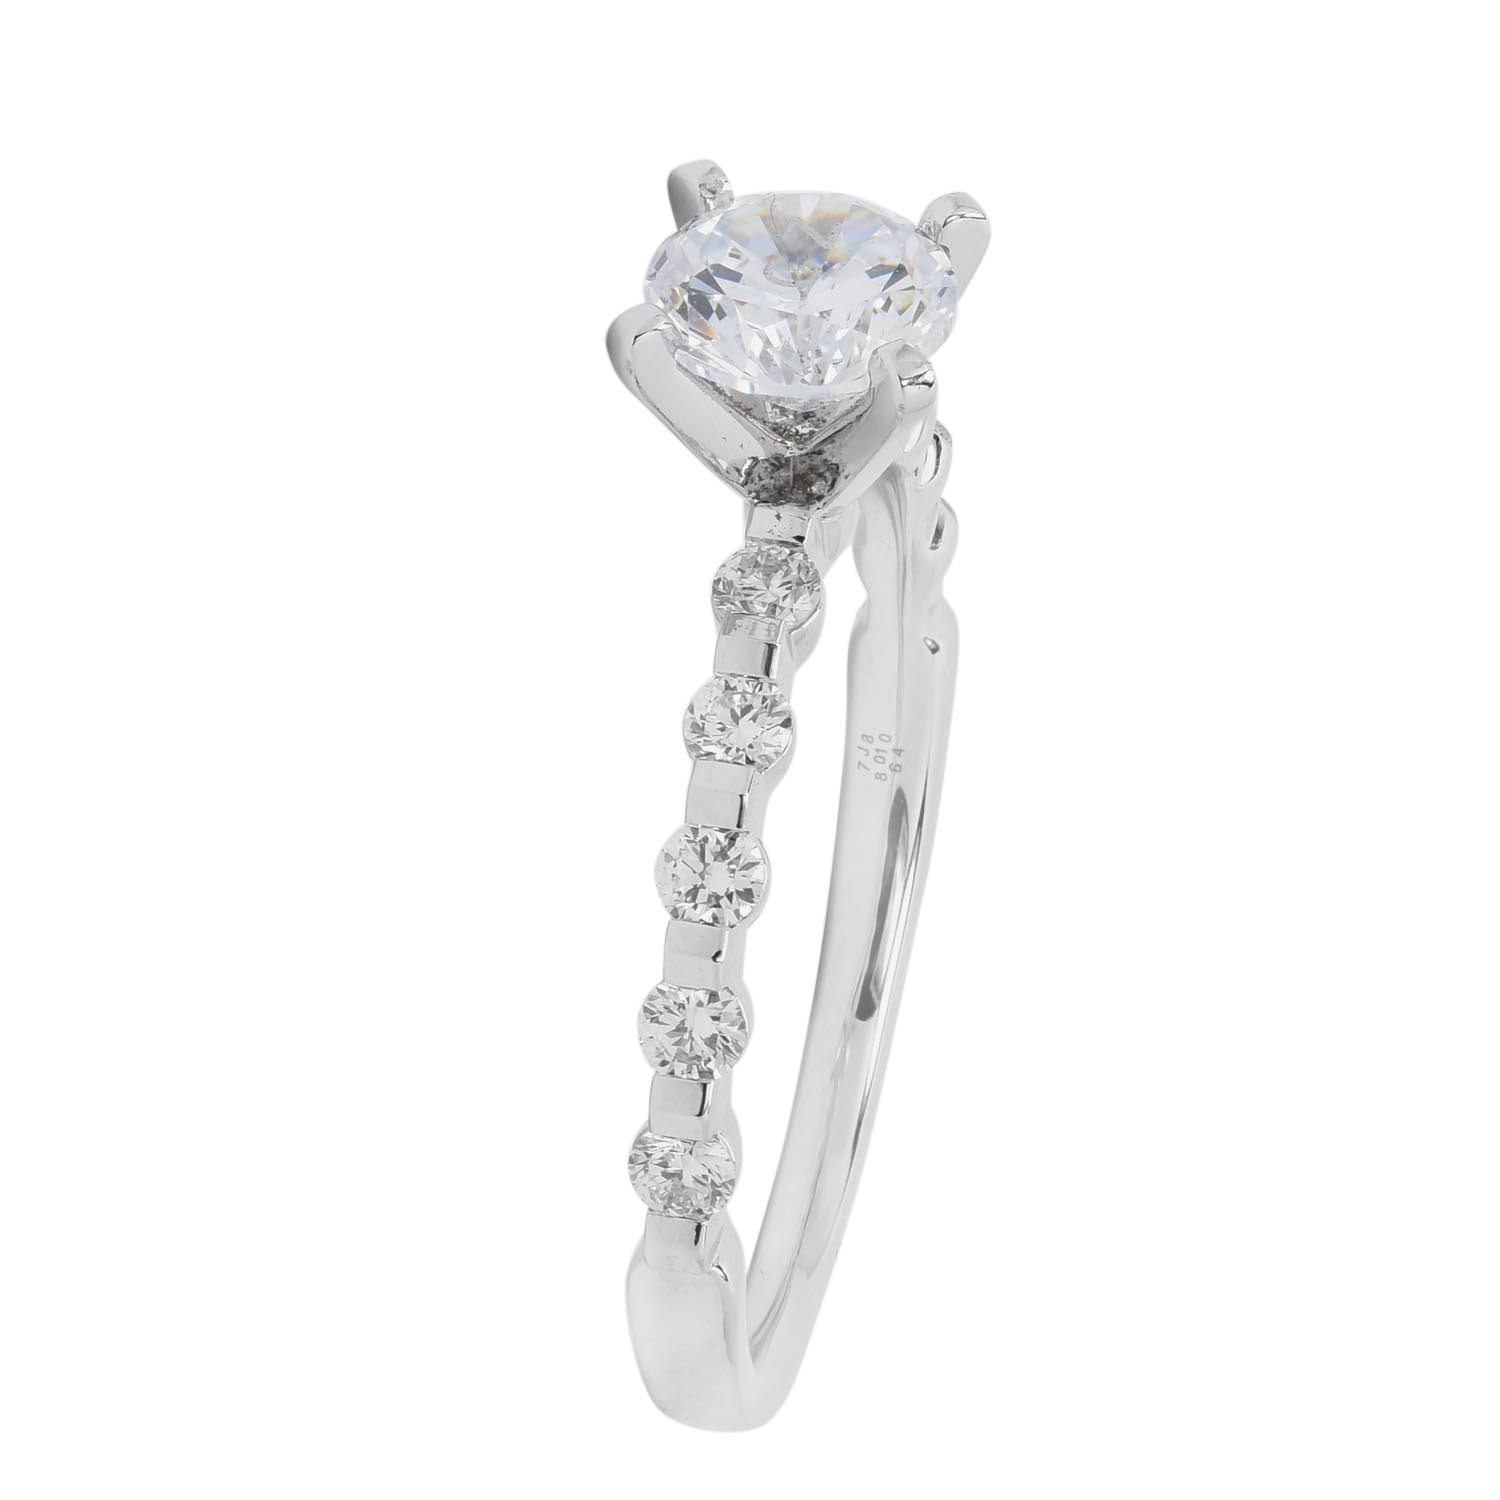 Memoire Precious Prong Diamond Engagement Setting in 18kt White Gold (1/3ct tw)